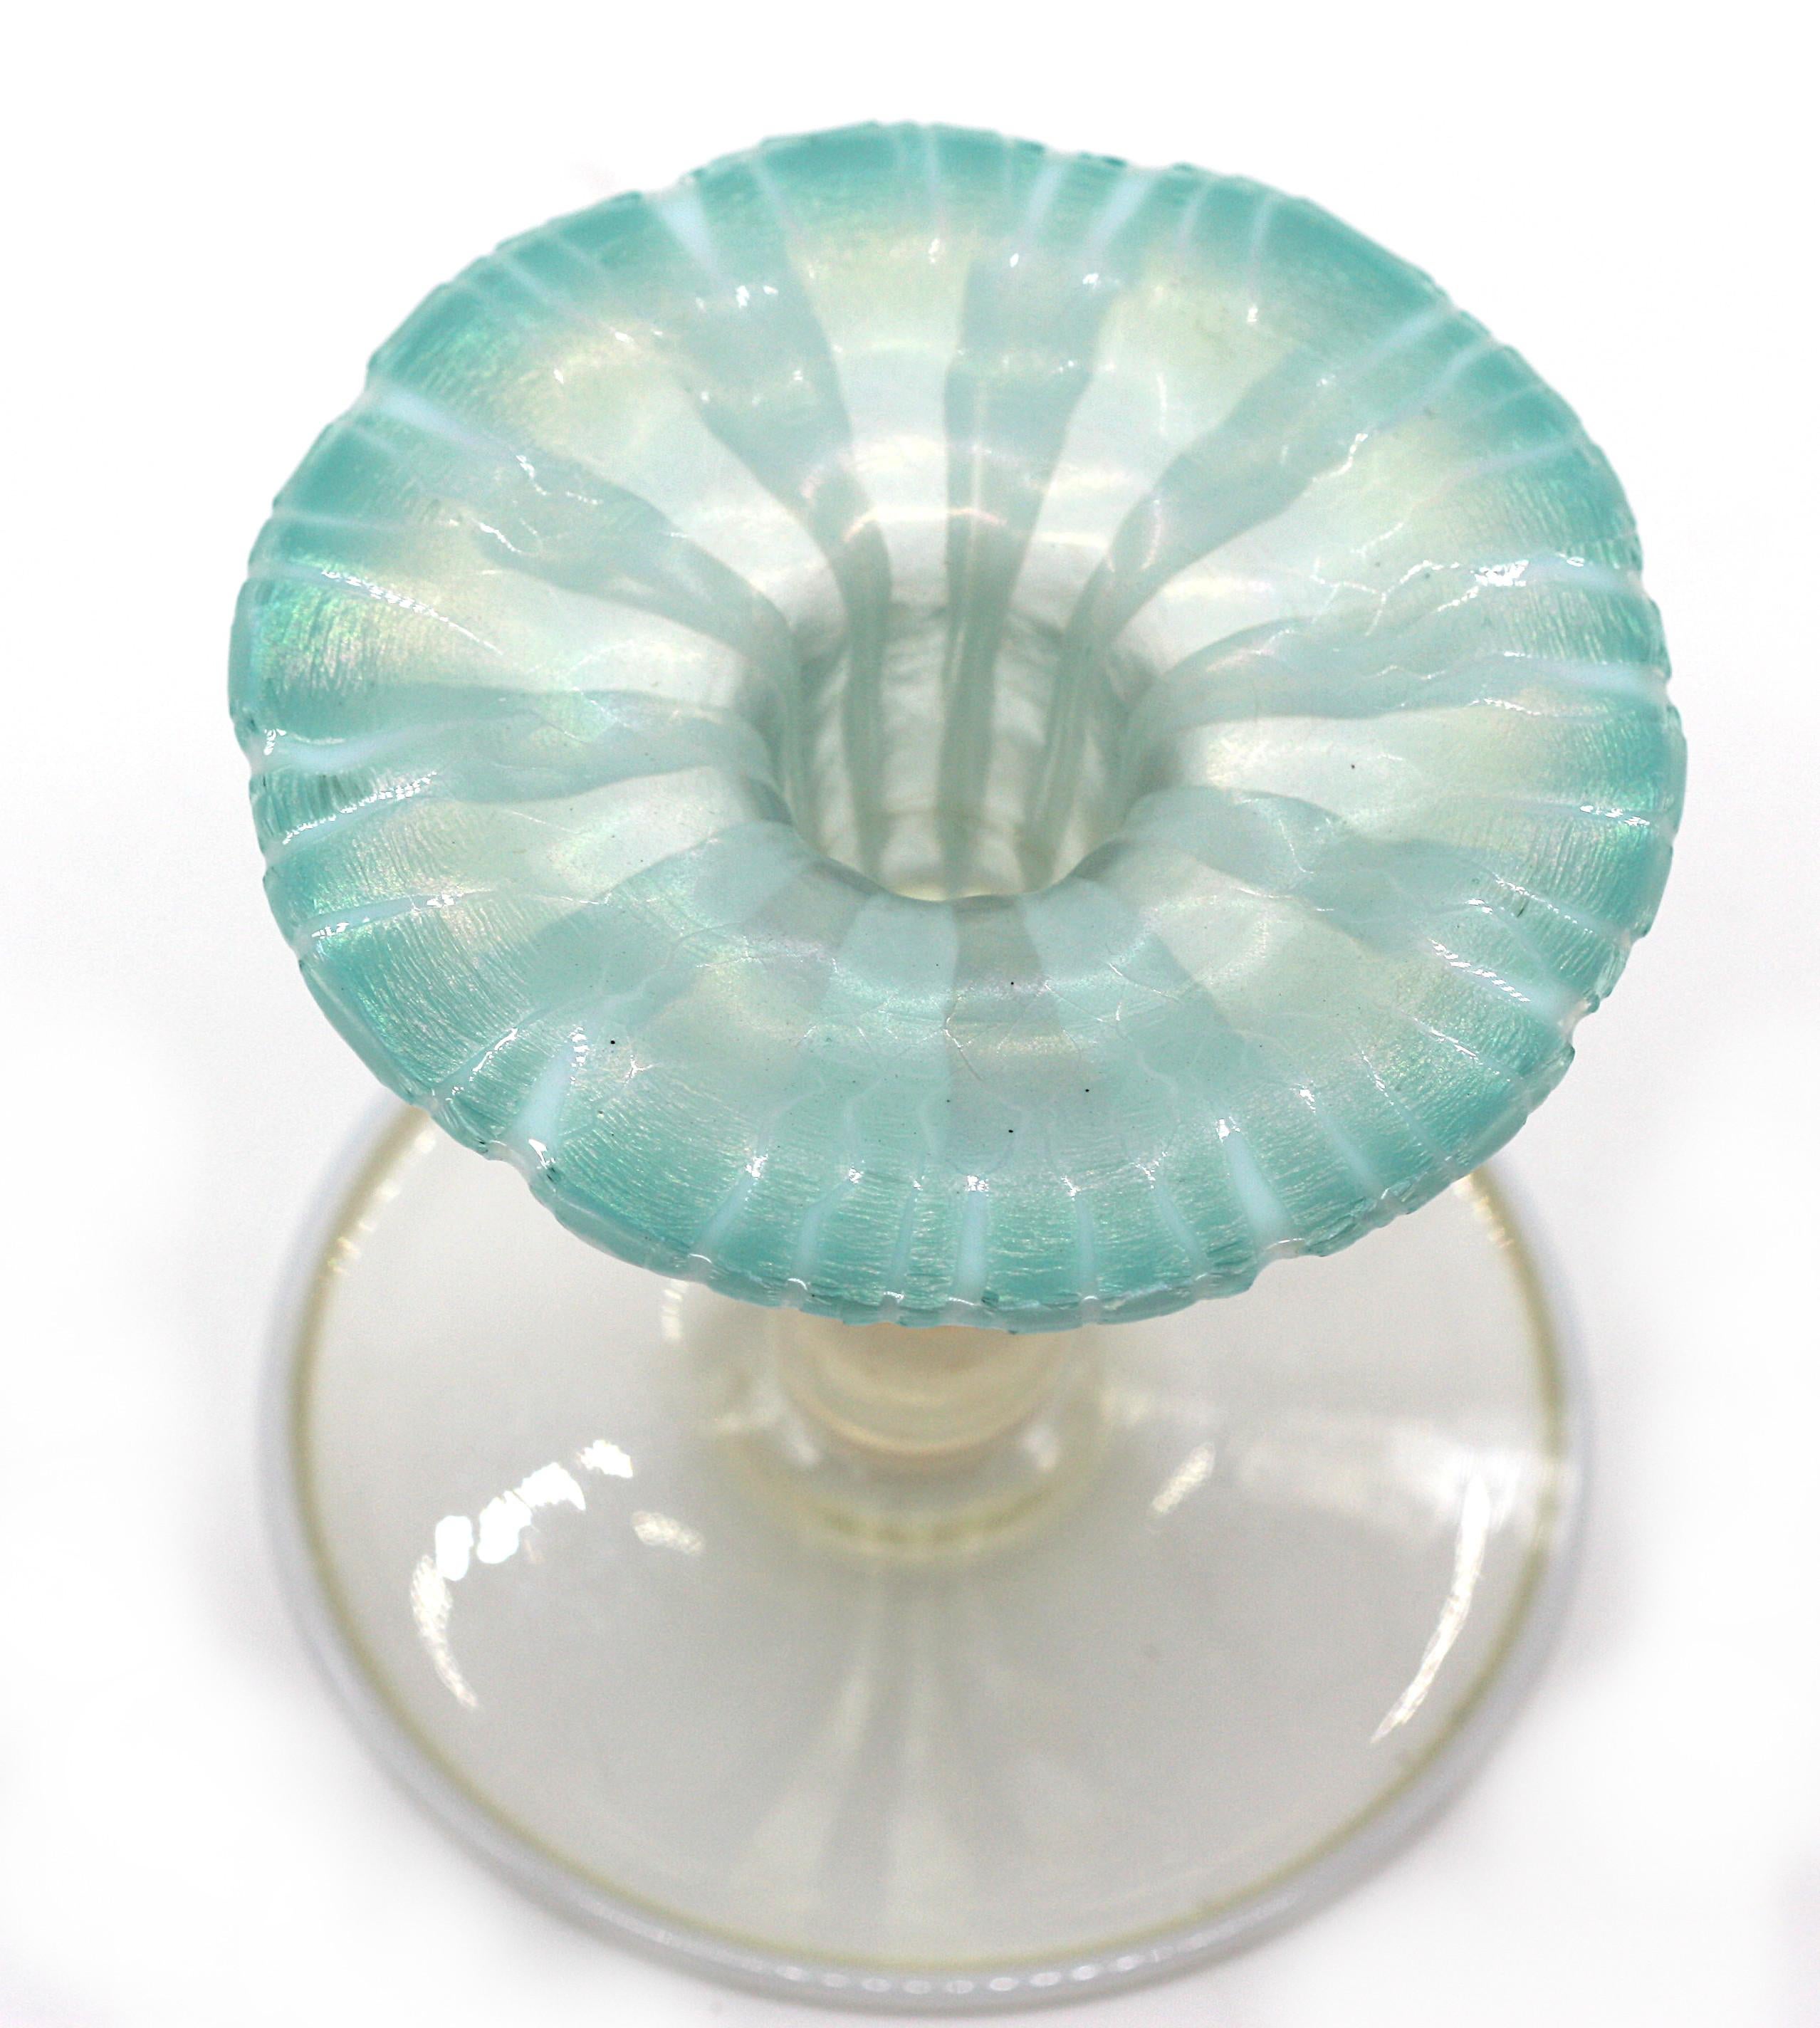 Tiffany Favrile Glass Morning Glory Candlestick circa 1918-1928 In Good Condition For Sale In West Palm Beach, FL